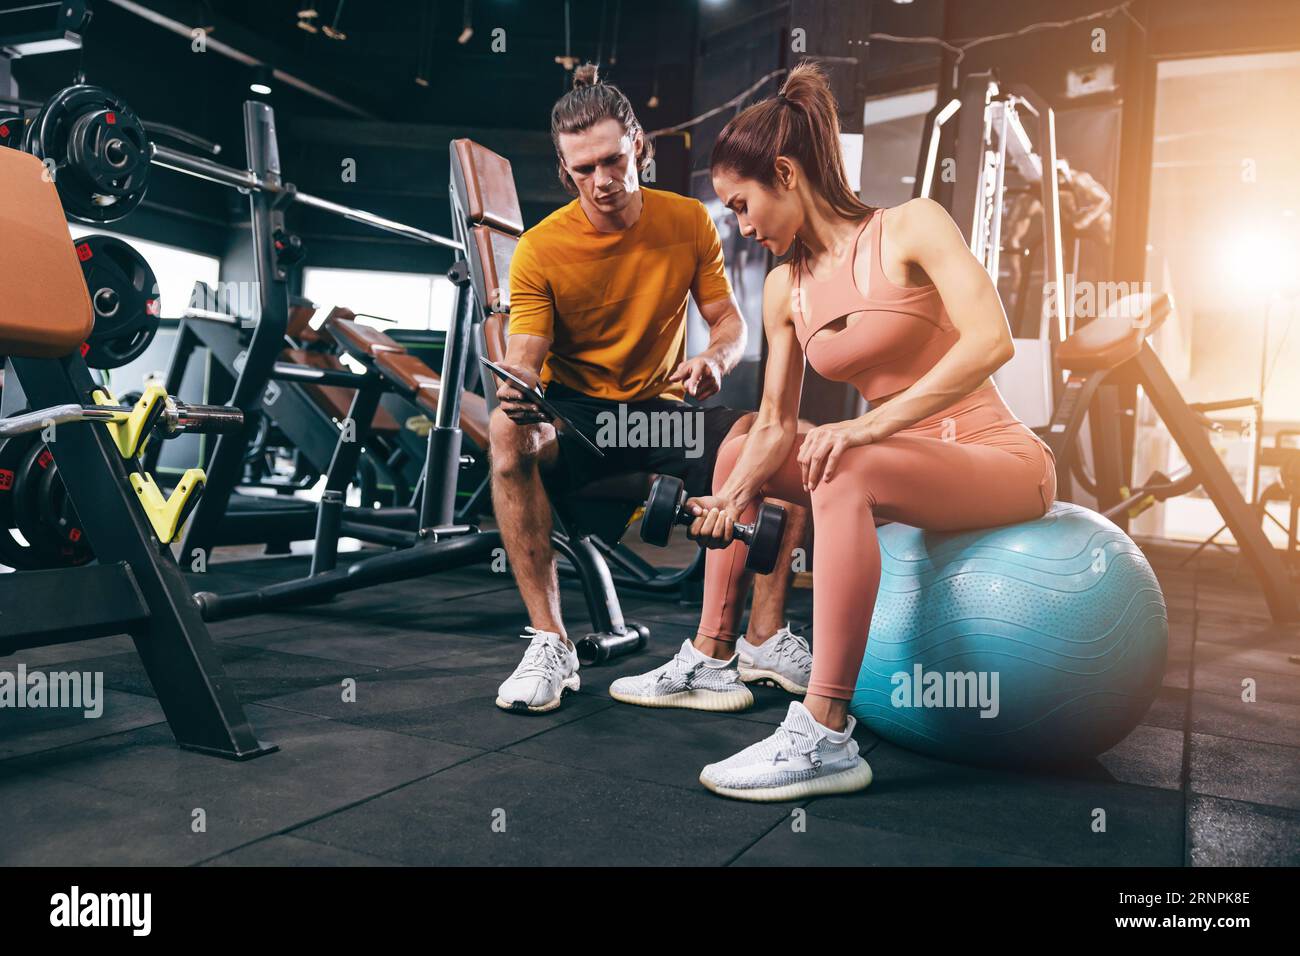 sport woman training muscle in private class gym with personal trainer help support Stock Photo